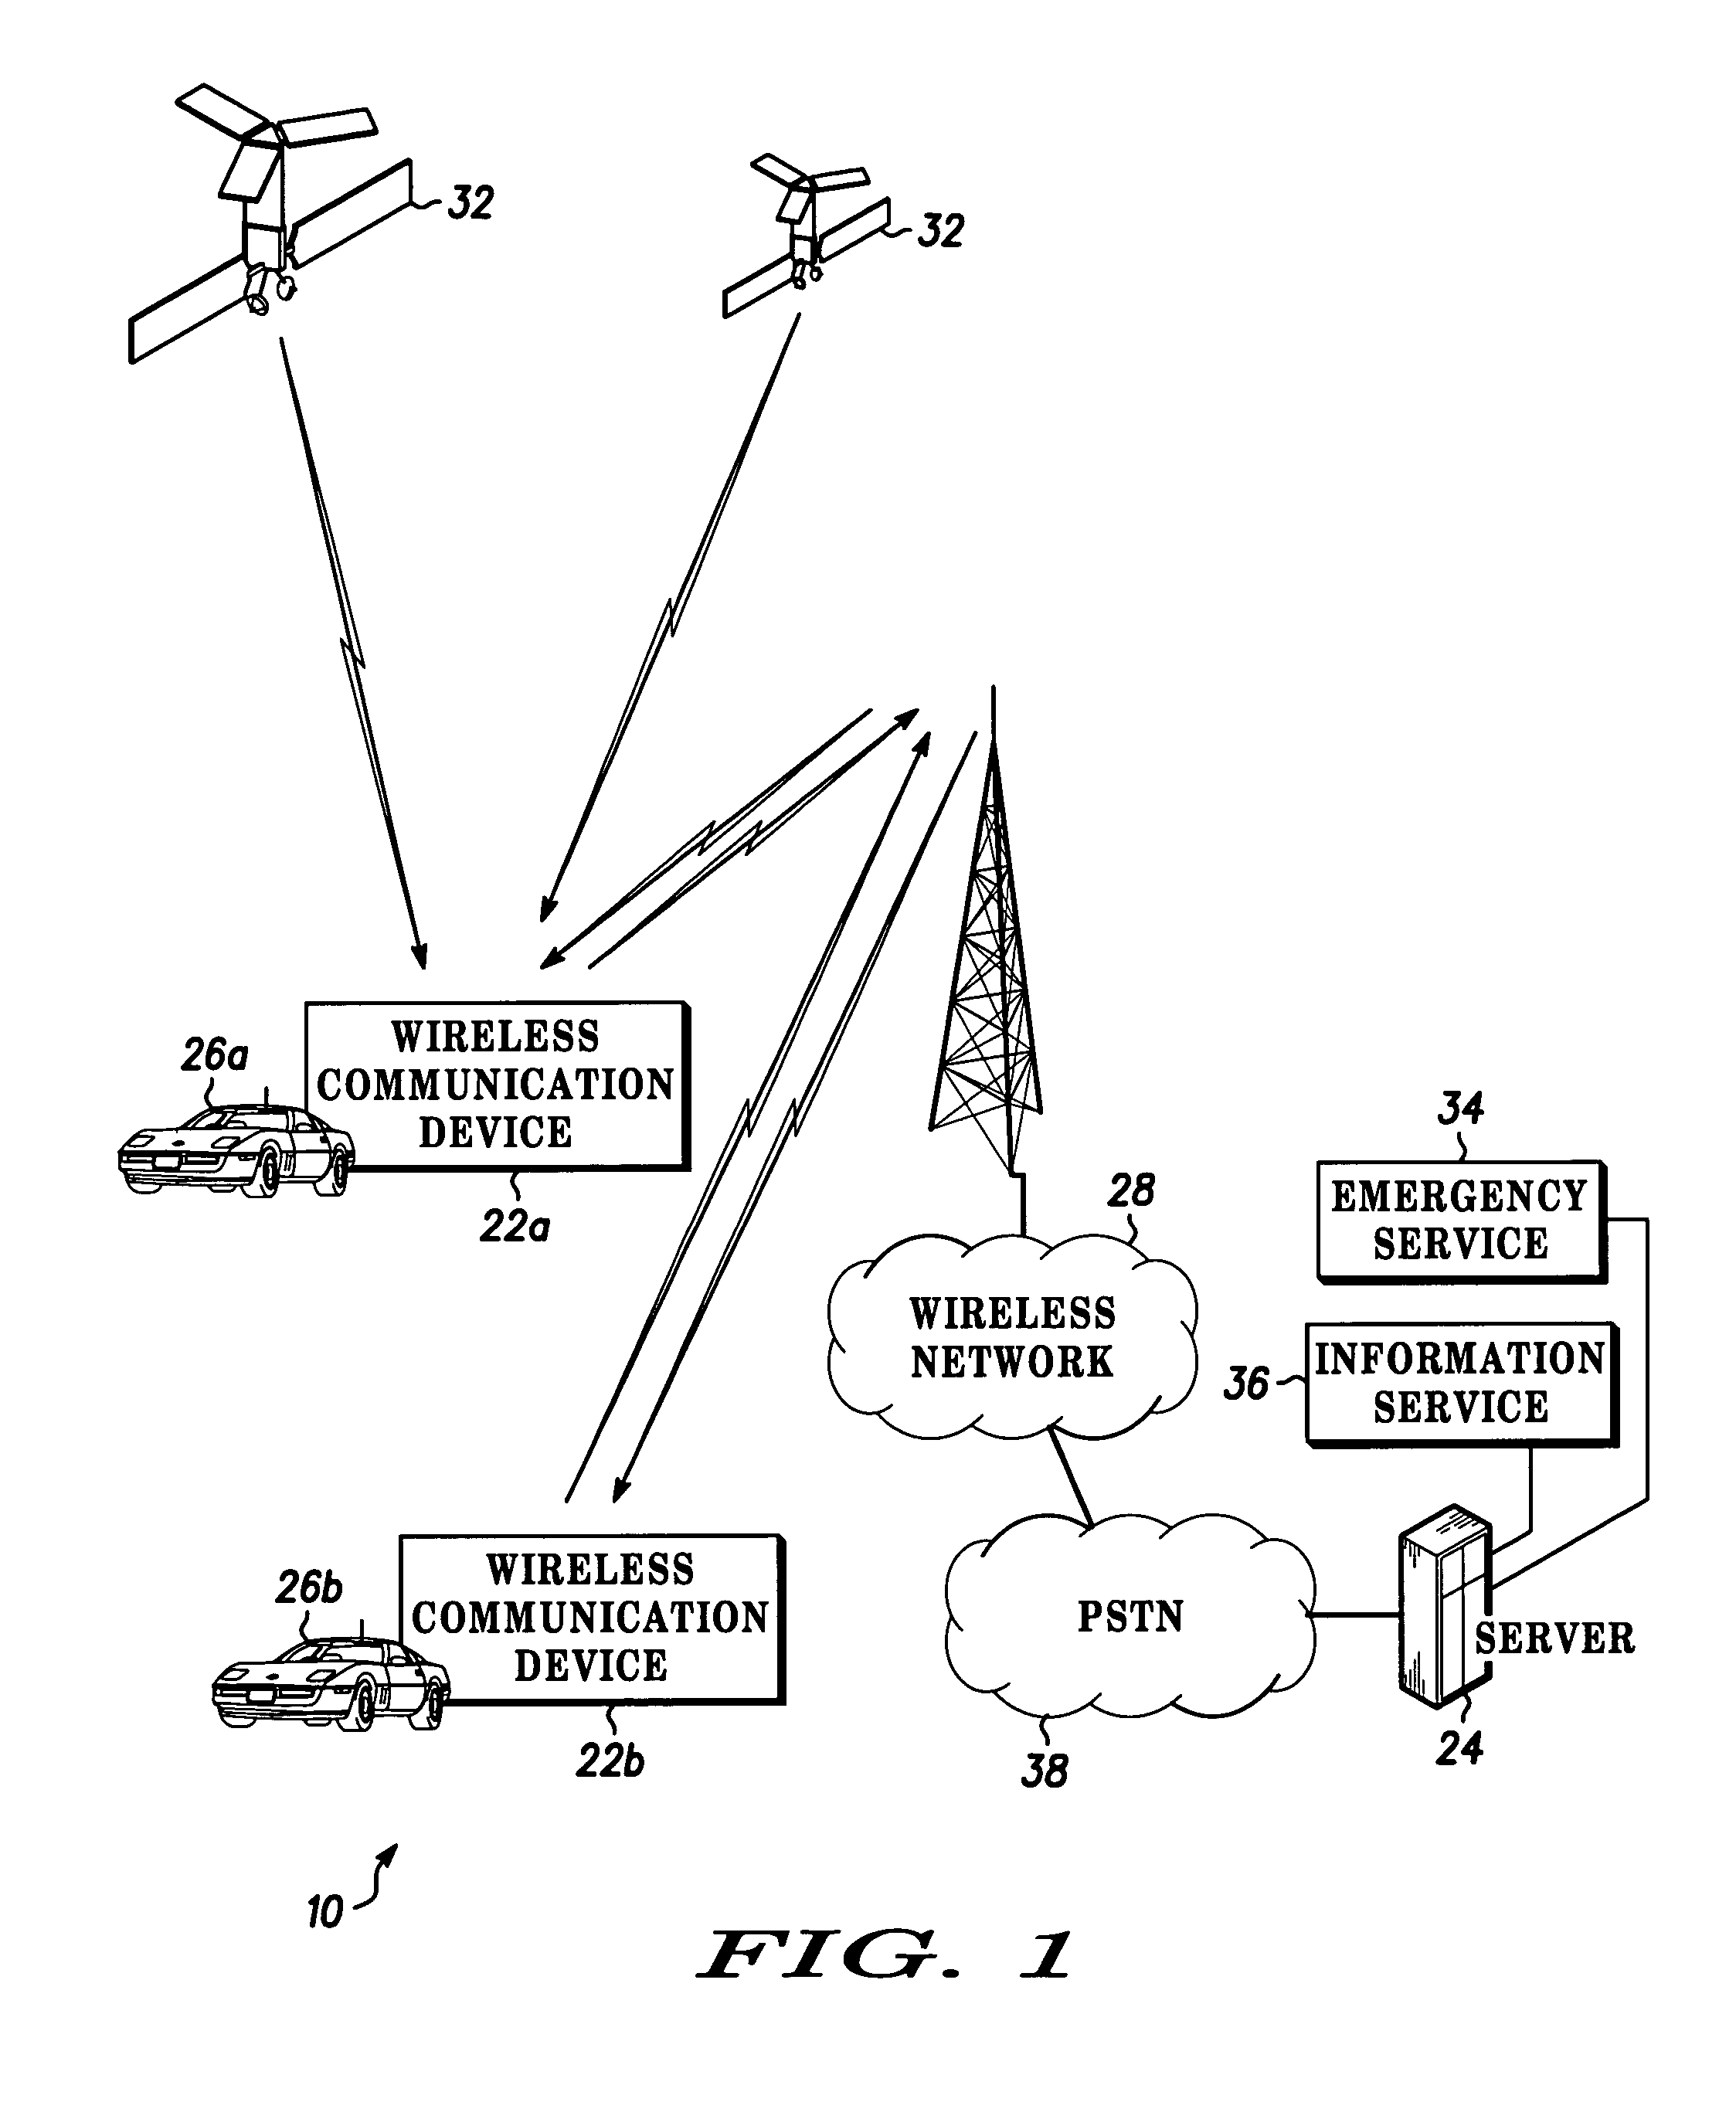 Conversion of calls from an ad hoc communication network